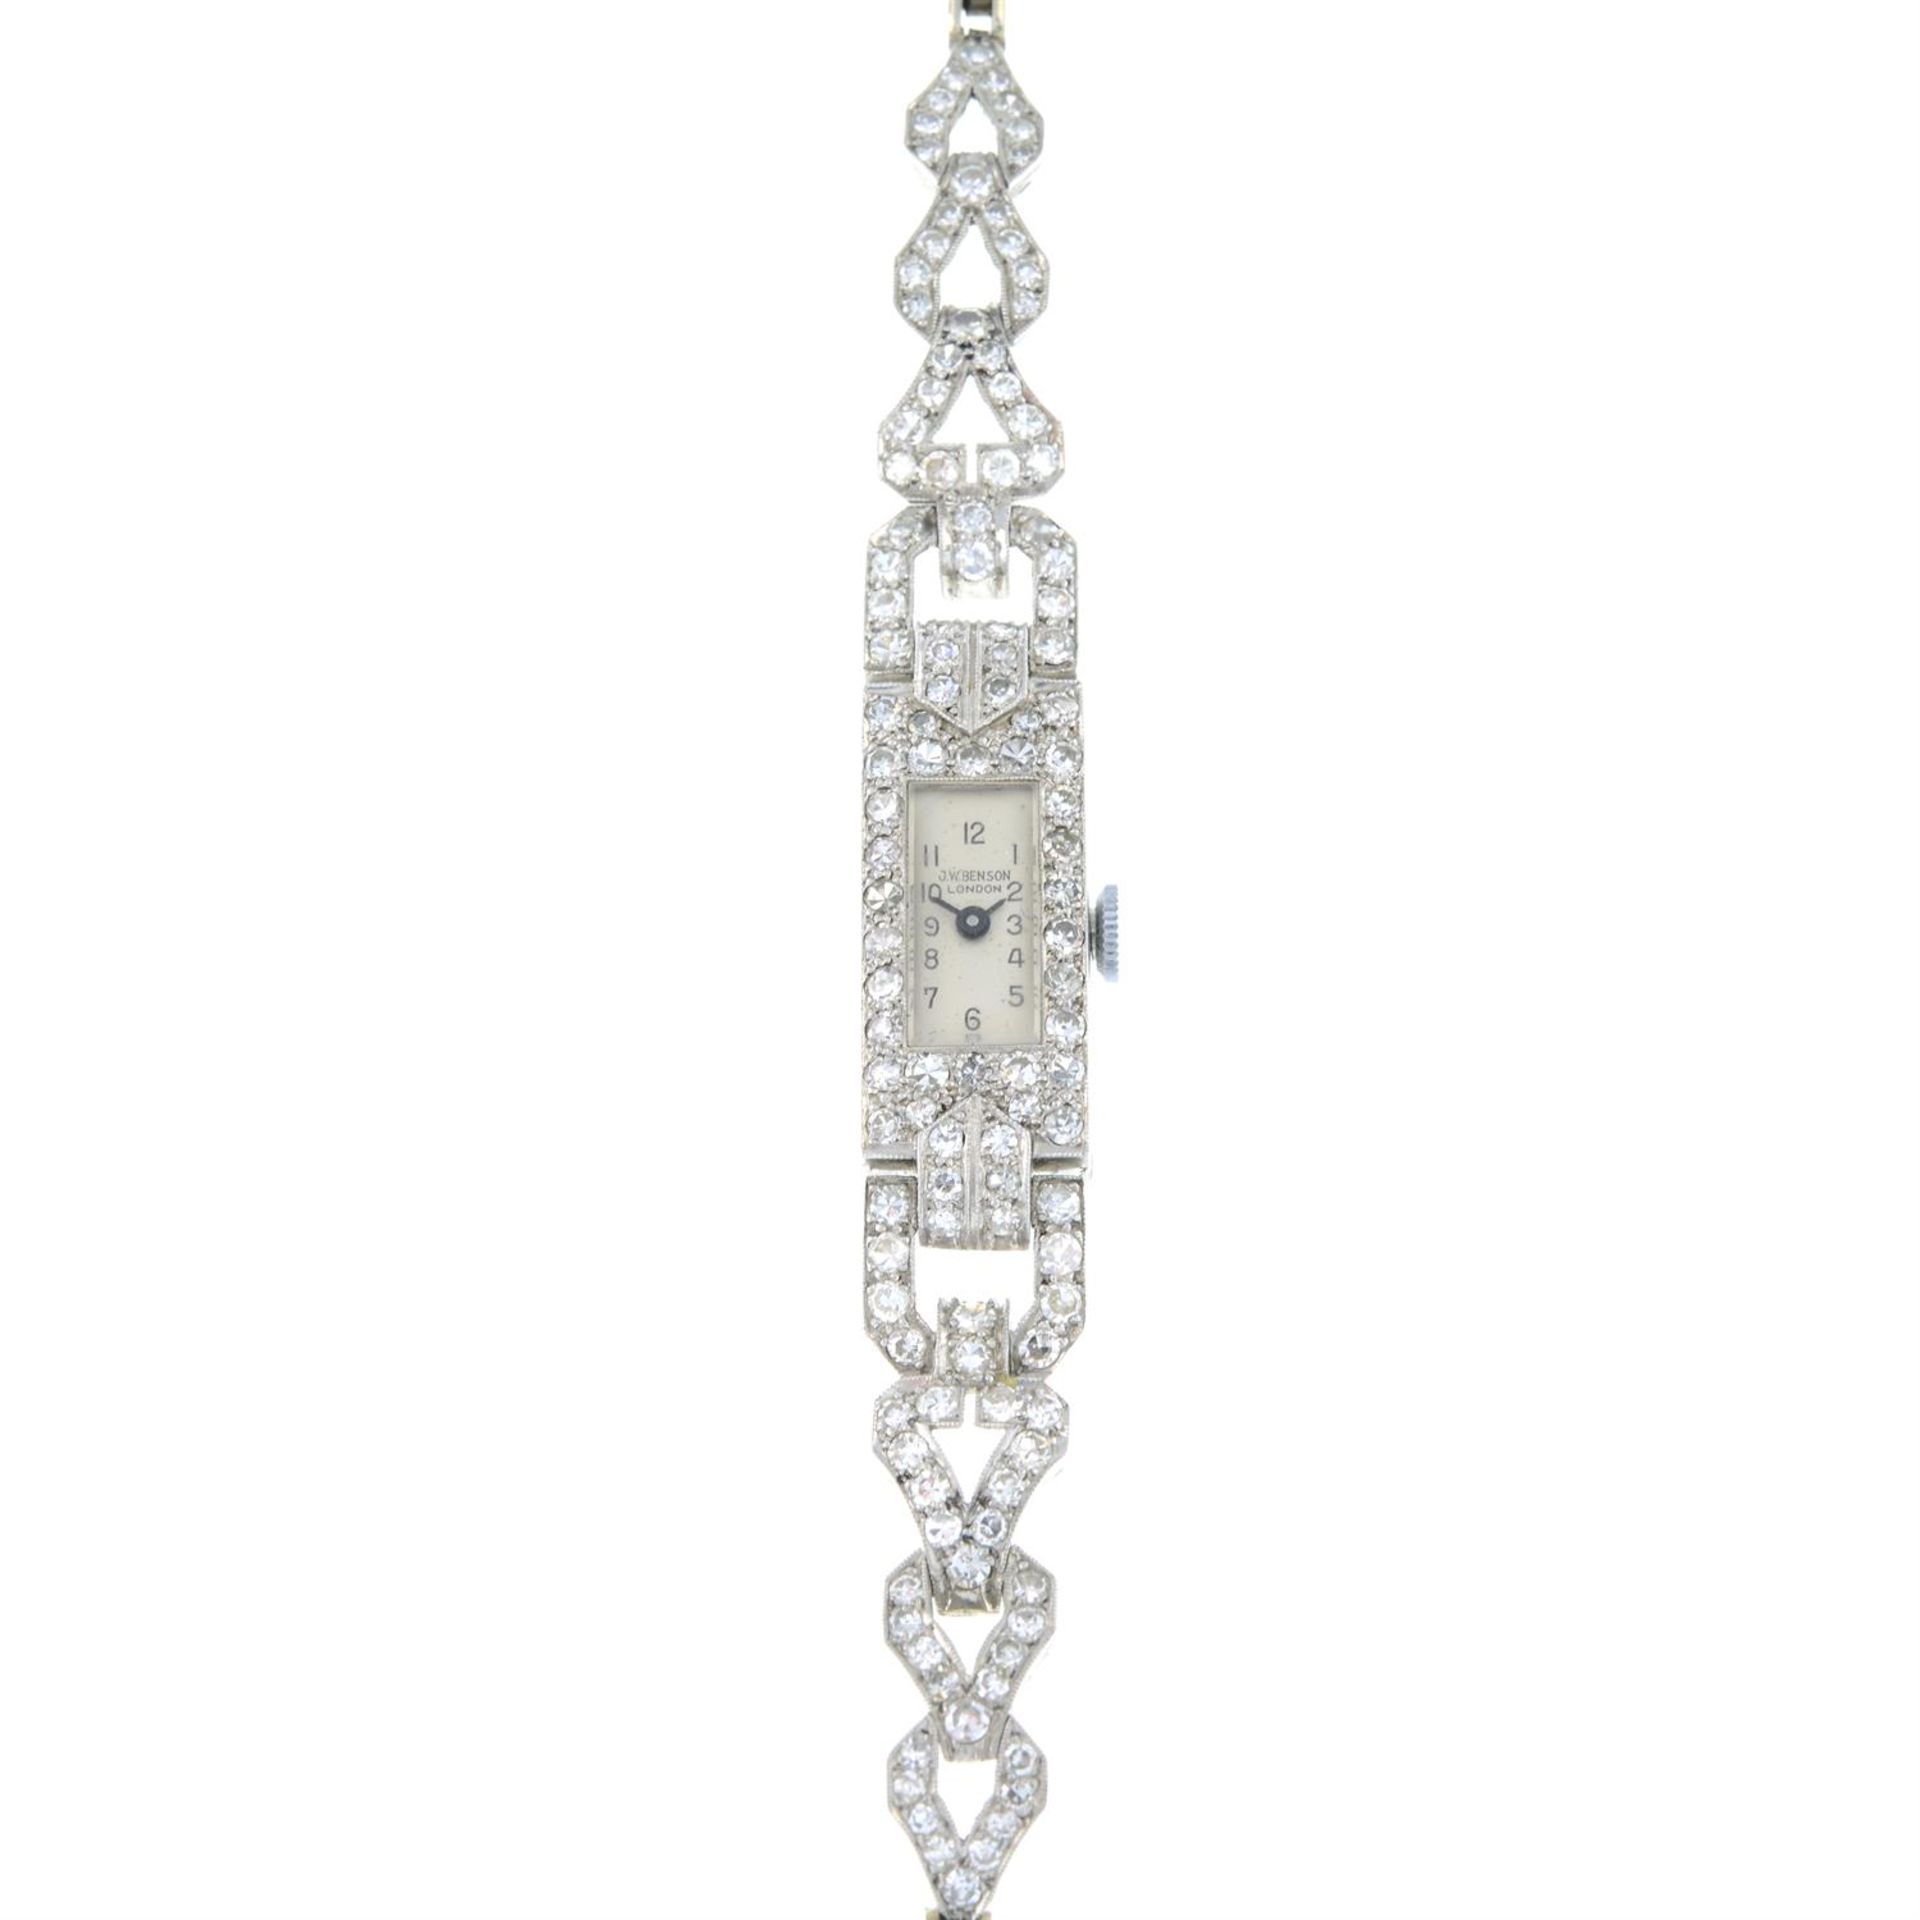 A lady's early 20th century platinum diamond cocktail watch.